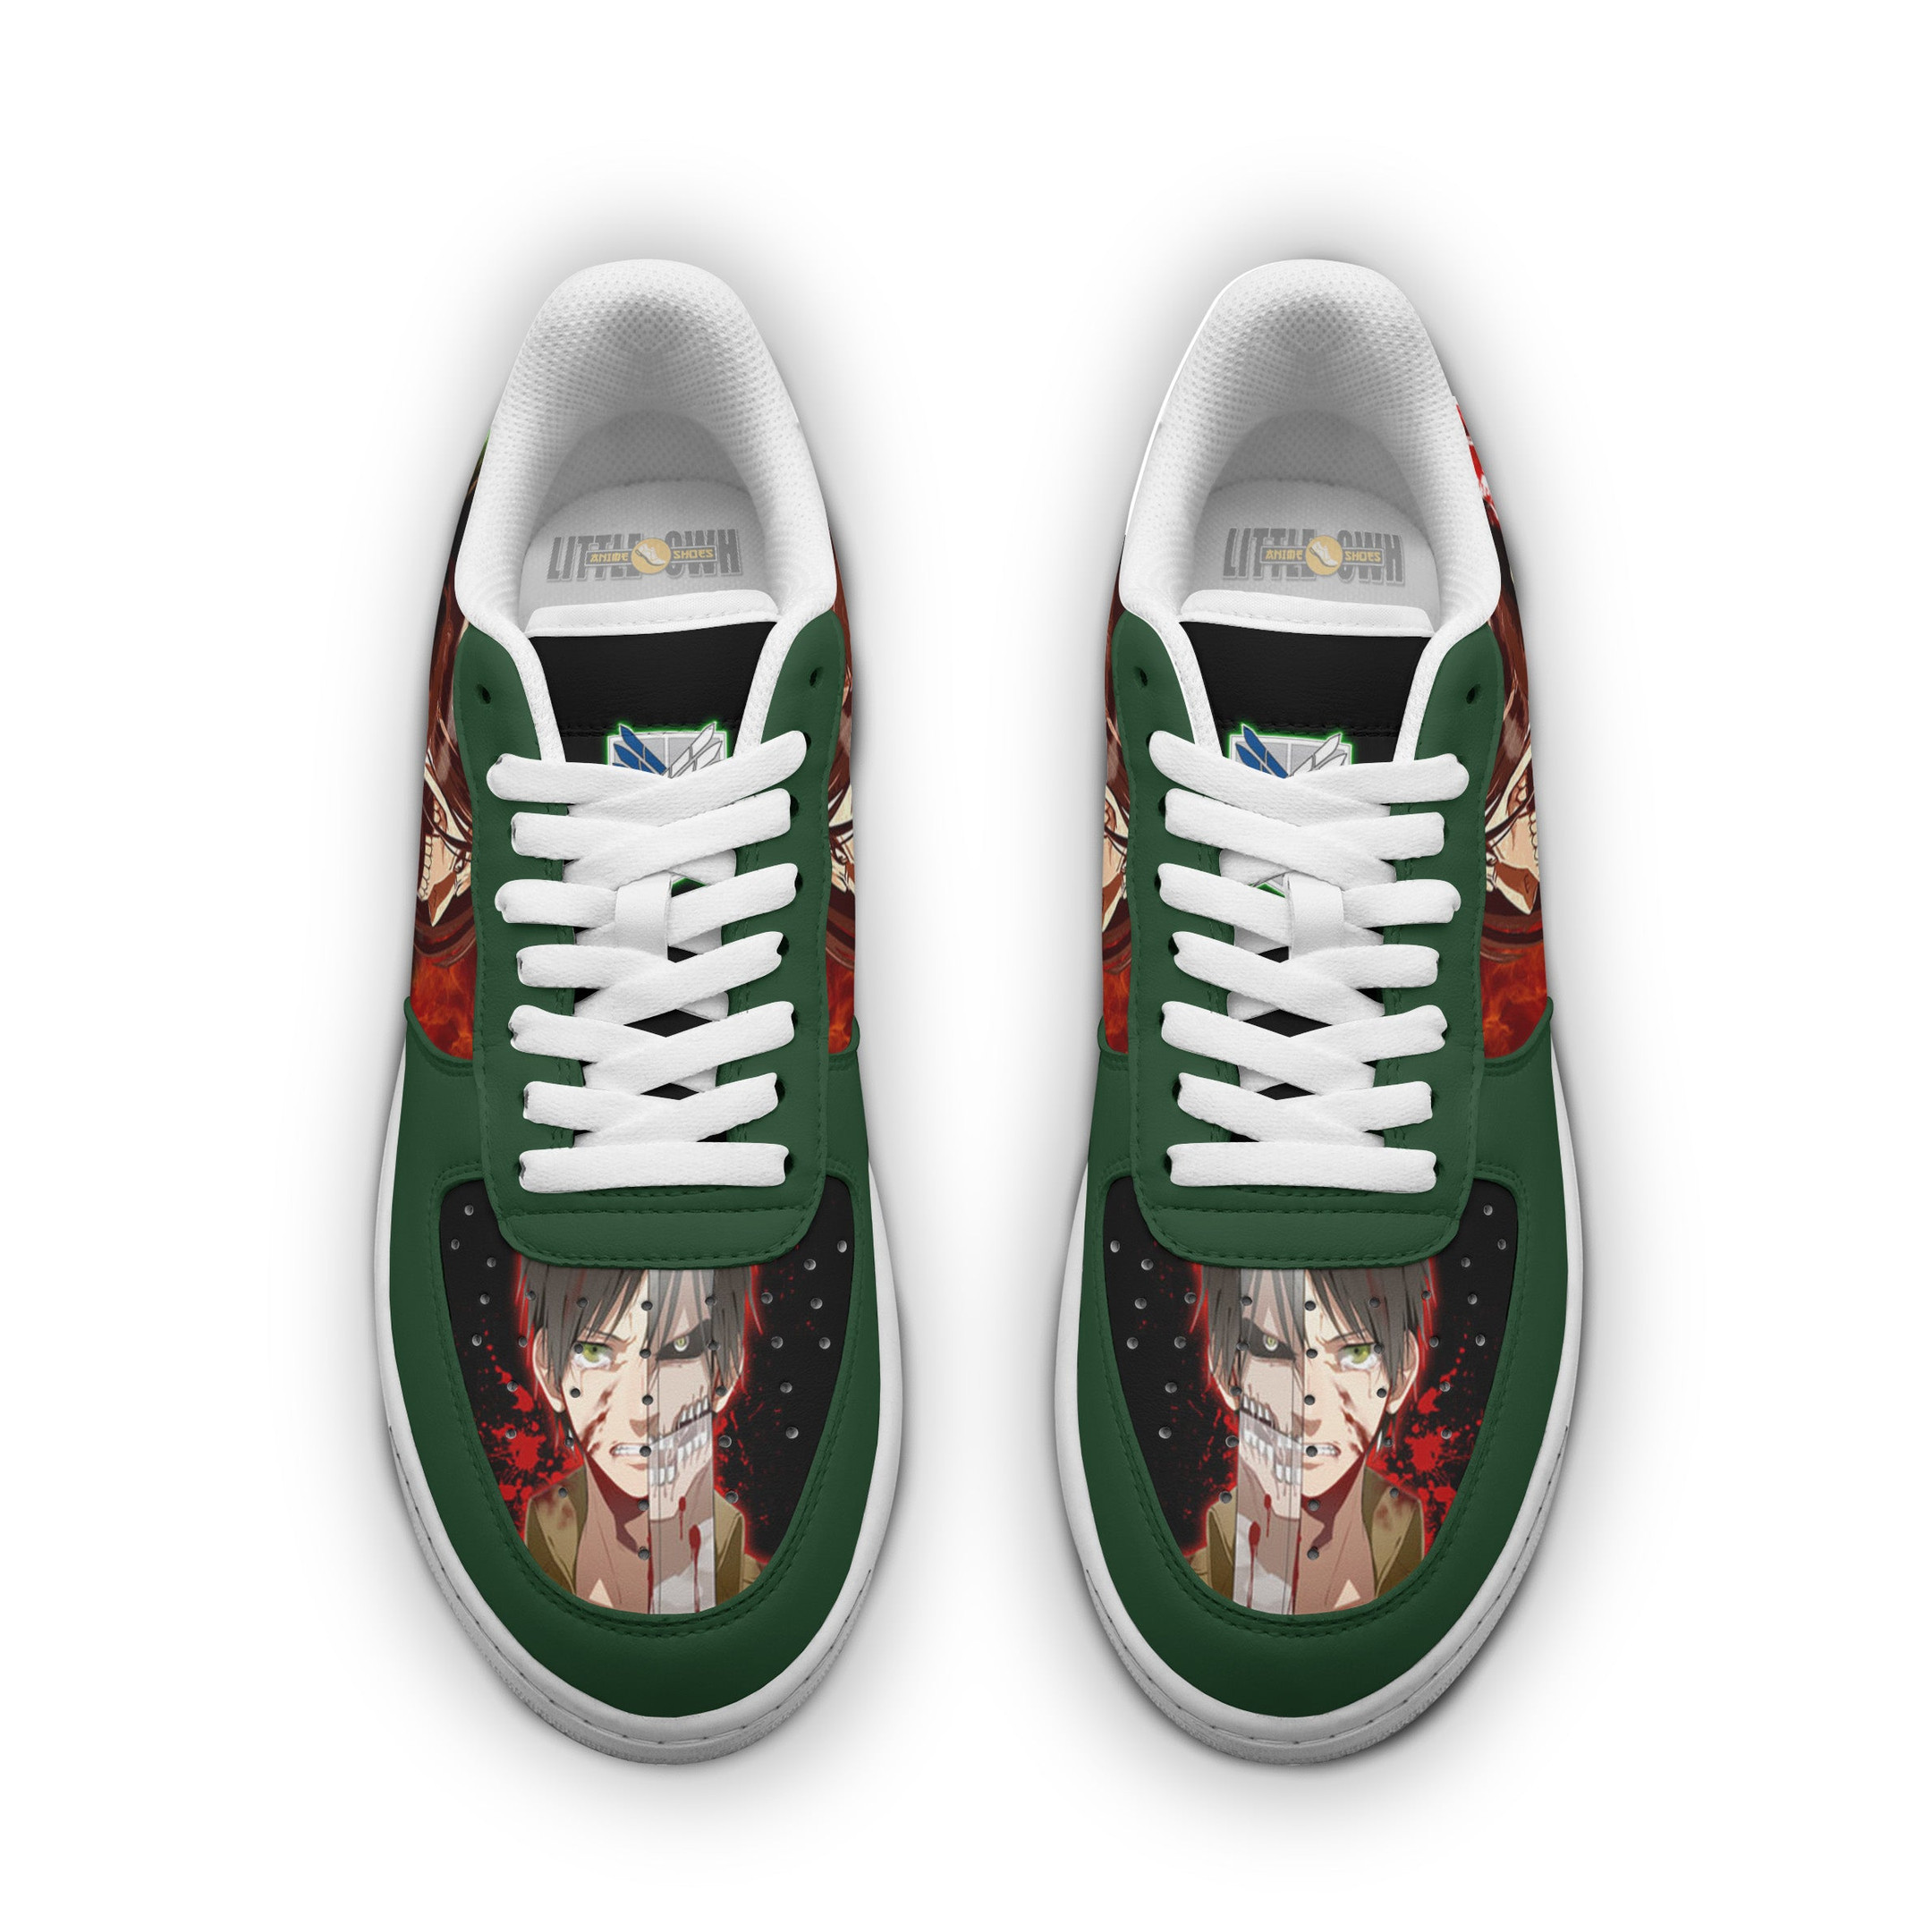 Eren Yeager AF Sneakers Custom Attack On Titan Anime Shoes - LittleOwh - 3